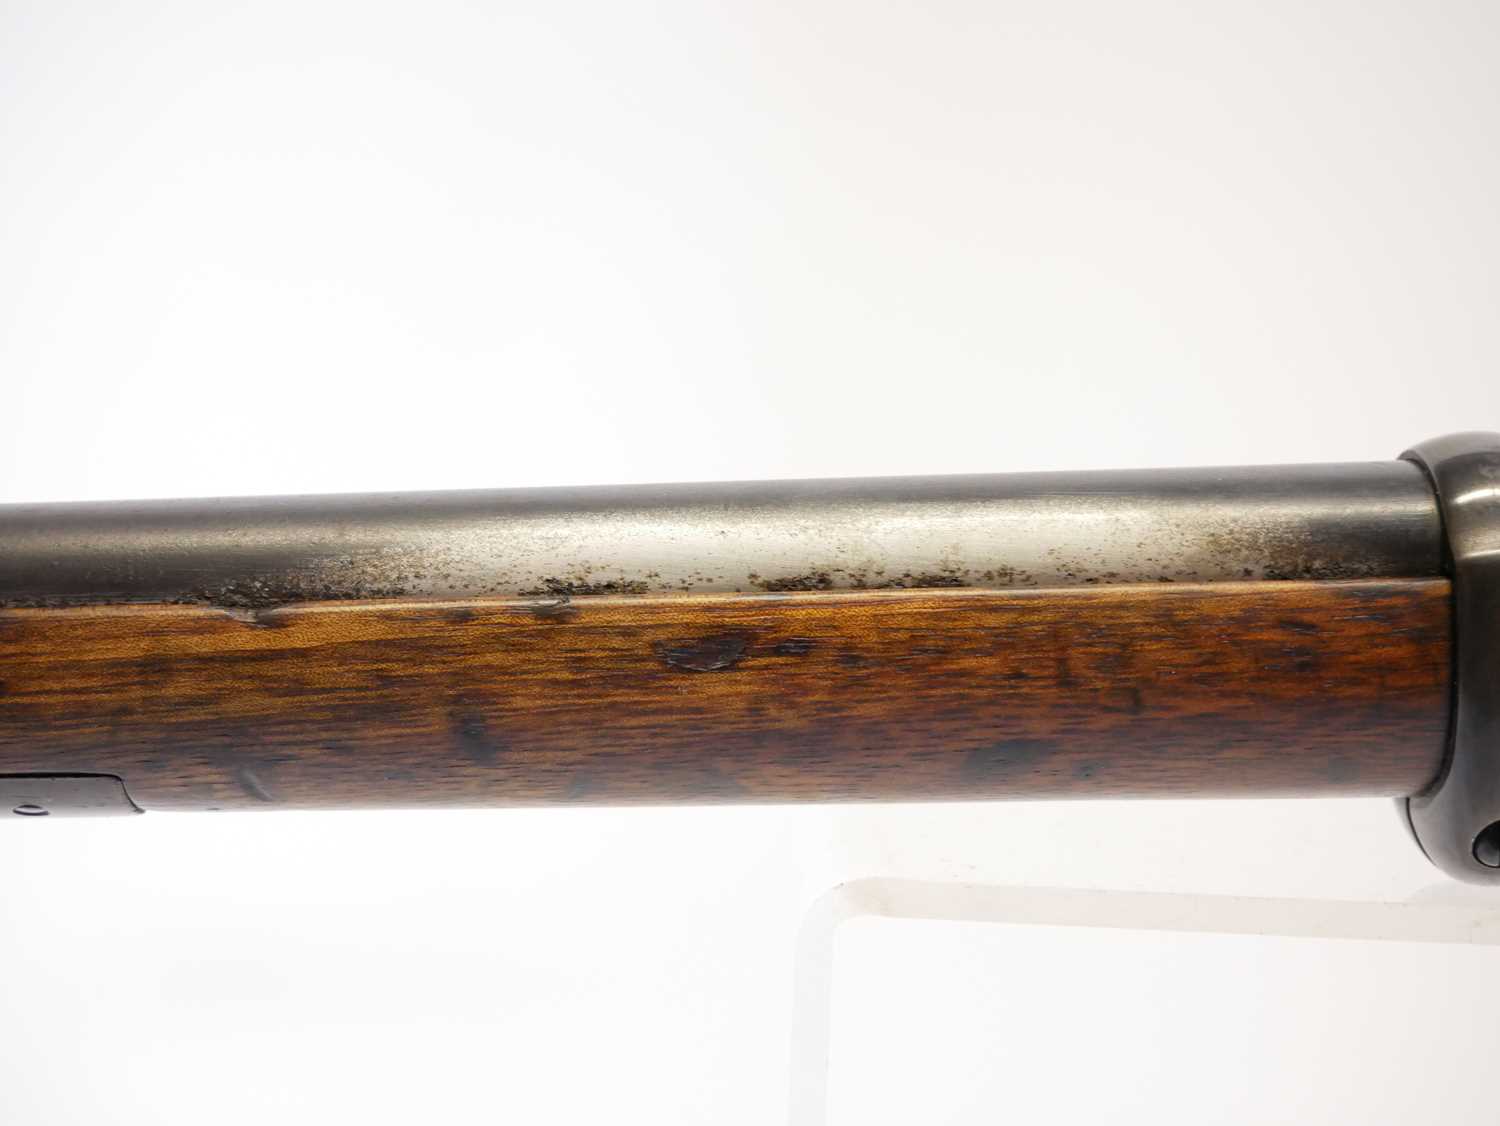 Enfield Martini Henry 577/450 Cavalry Carbine IC1, with 20.5 inch barrel (saw cut to the breech) - Image 18 of 18